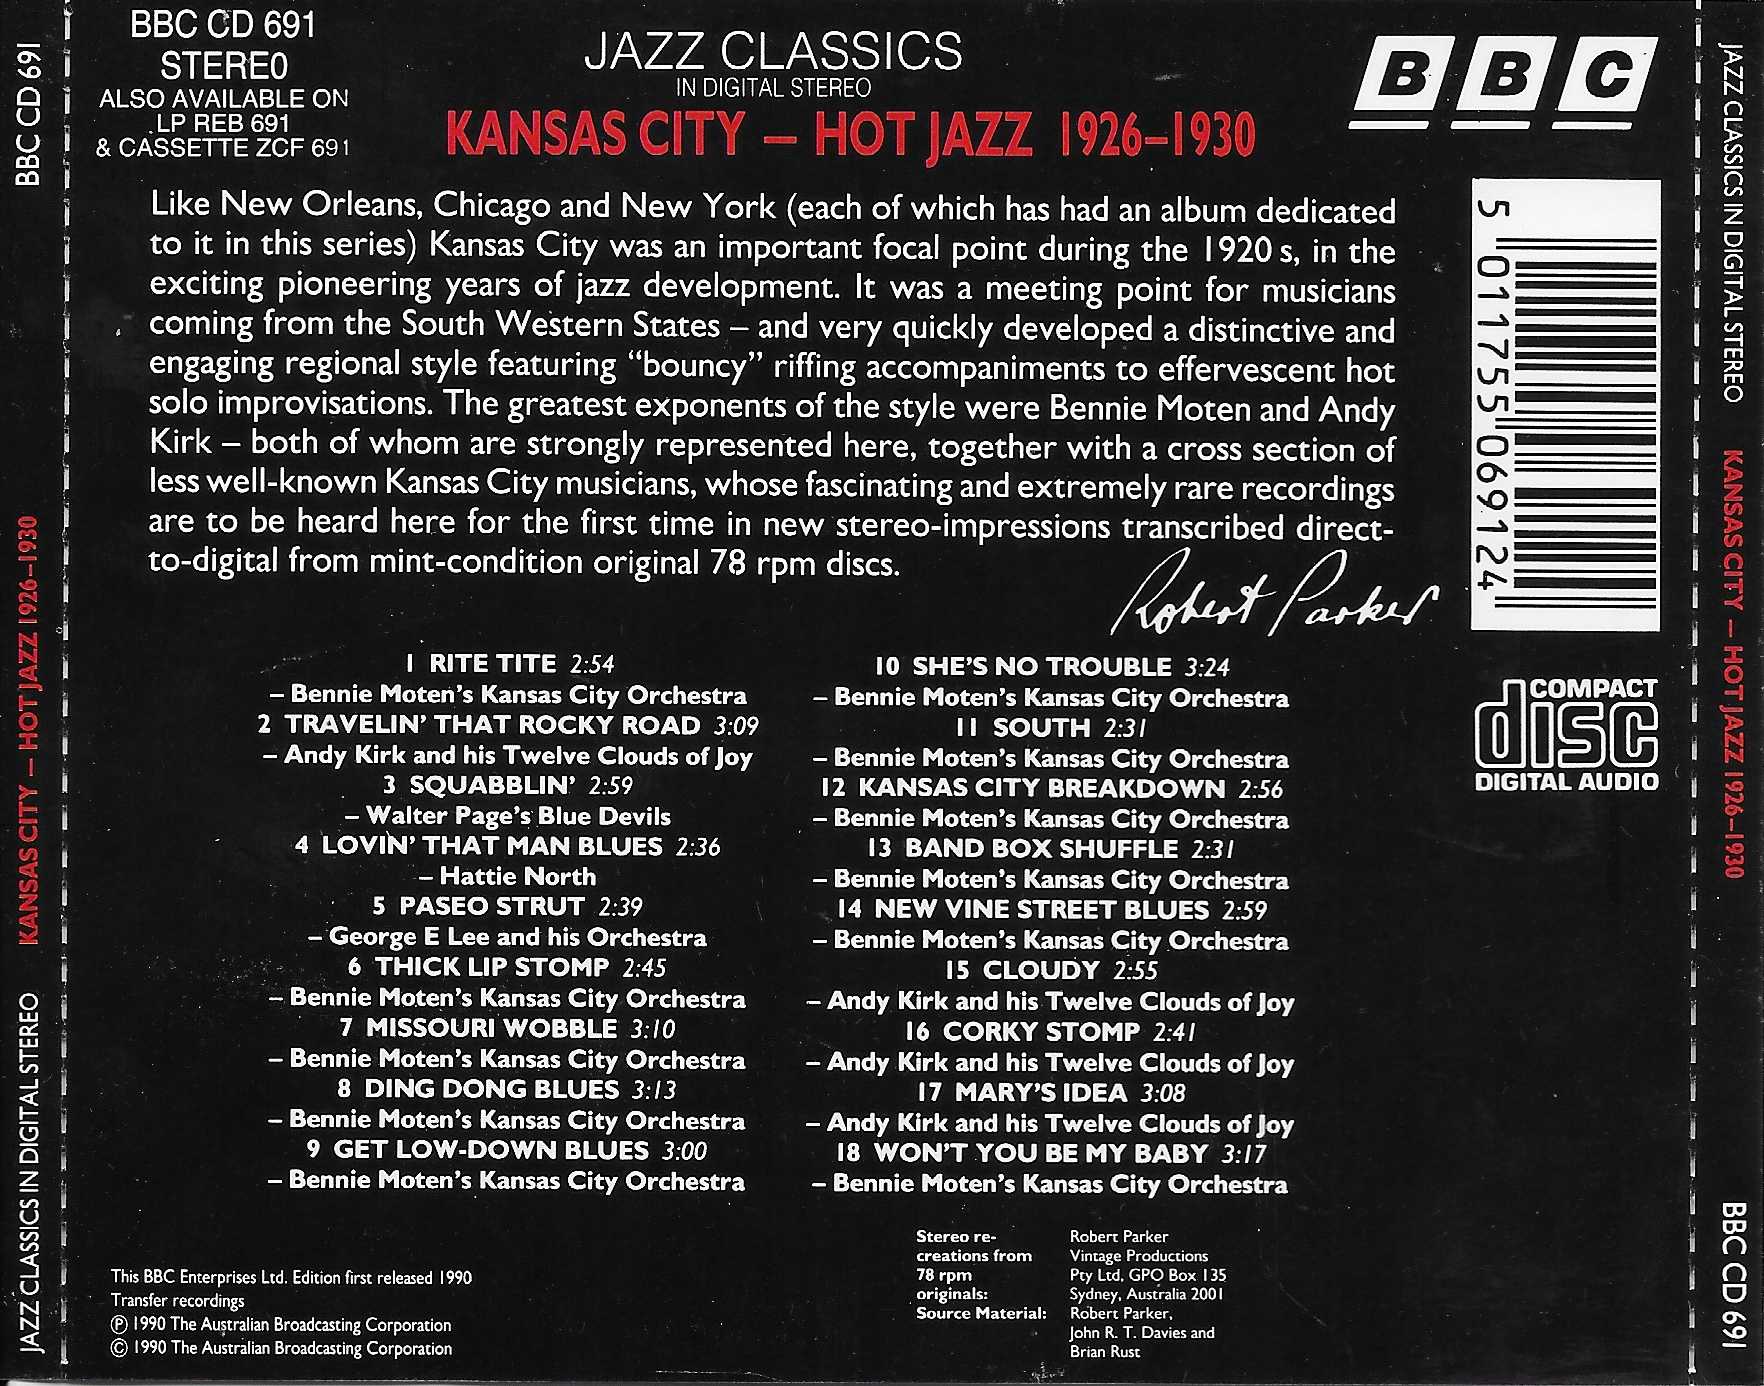 Picture of BBCCD691 Jazz classics - Kansas City 1926 - 1930 by artist Various from the BBC records and Tapes library